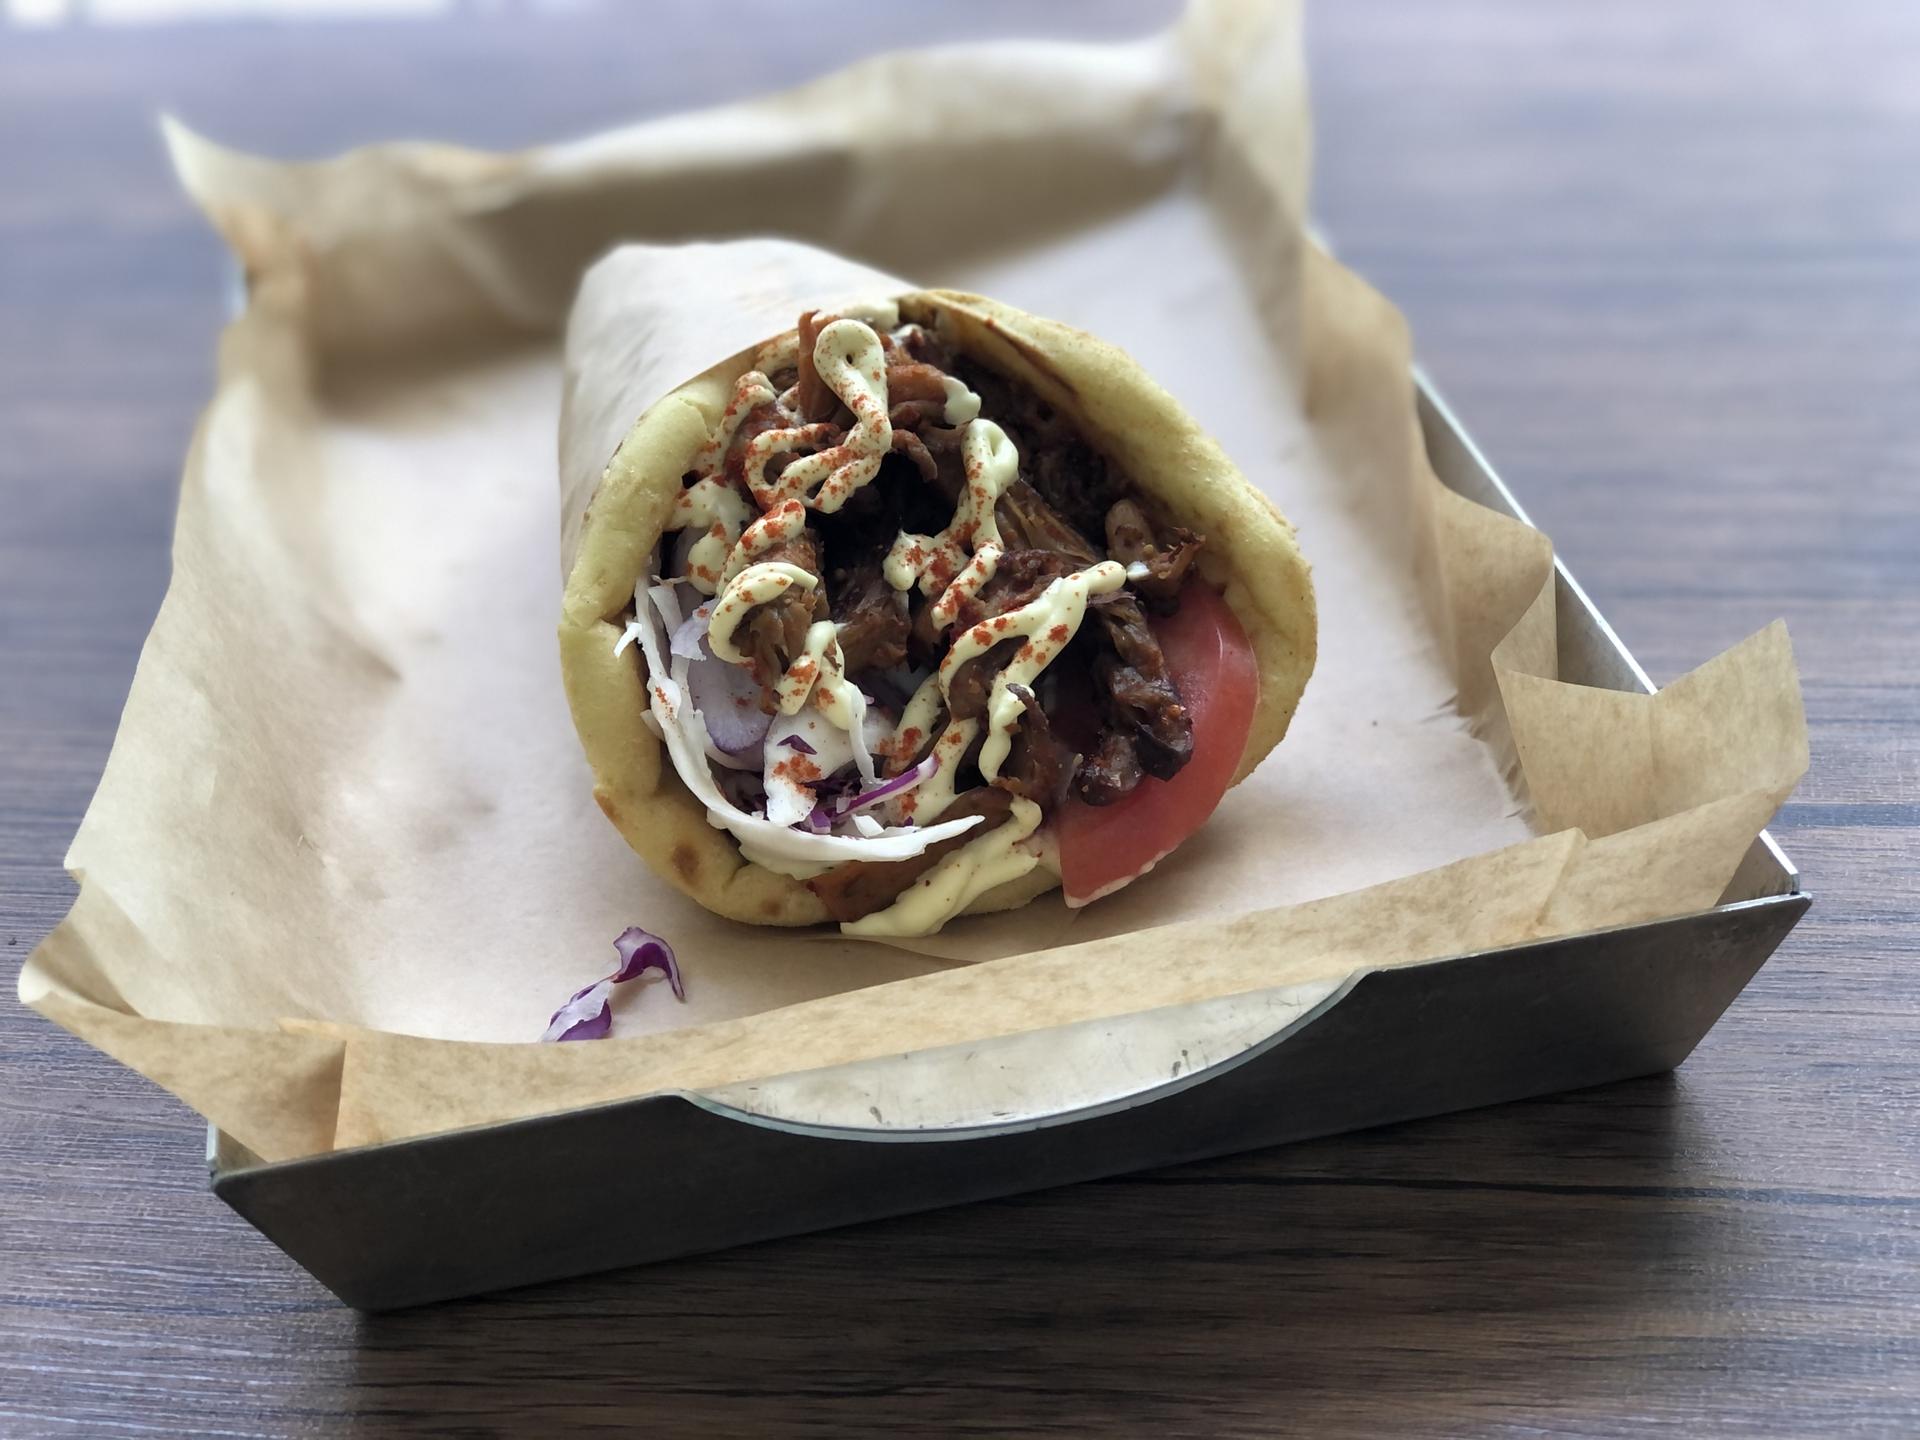 Vegan Beat’s gyro is stuffed with thinly sliced baked mushrooms, tomato, onion and vegan tzatziki sauce and mayonnaise.